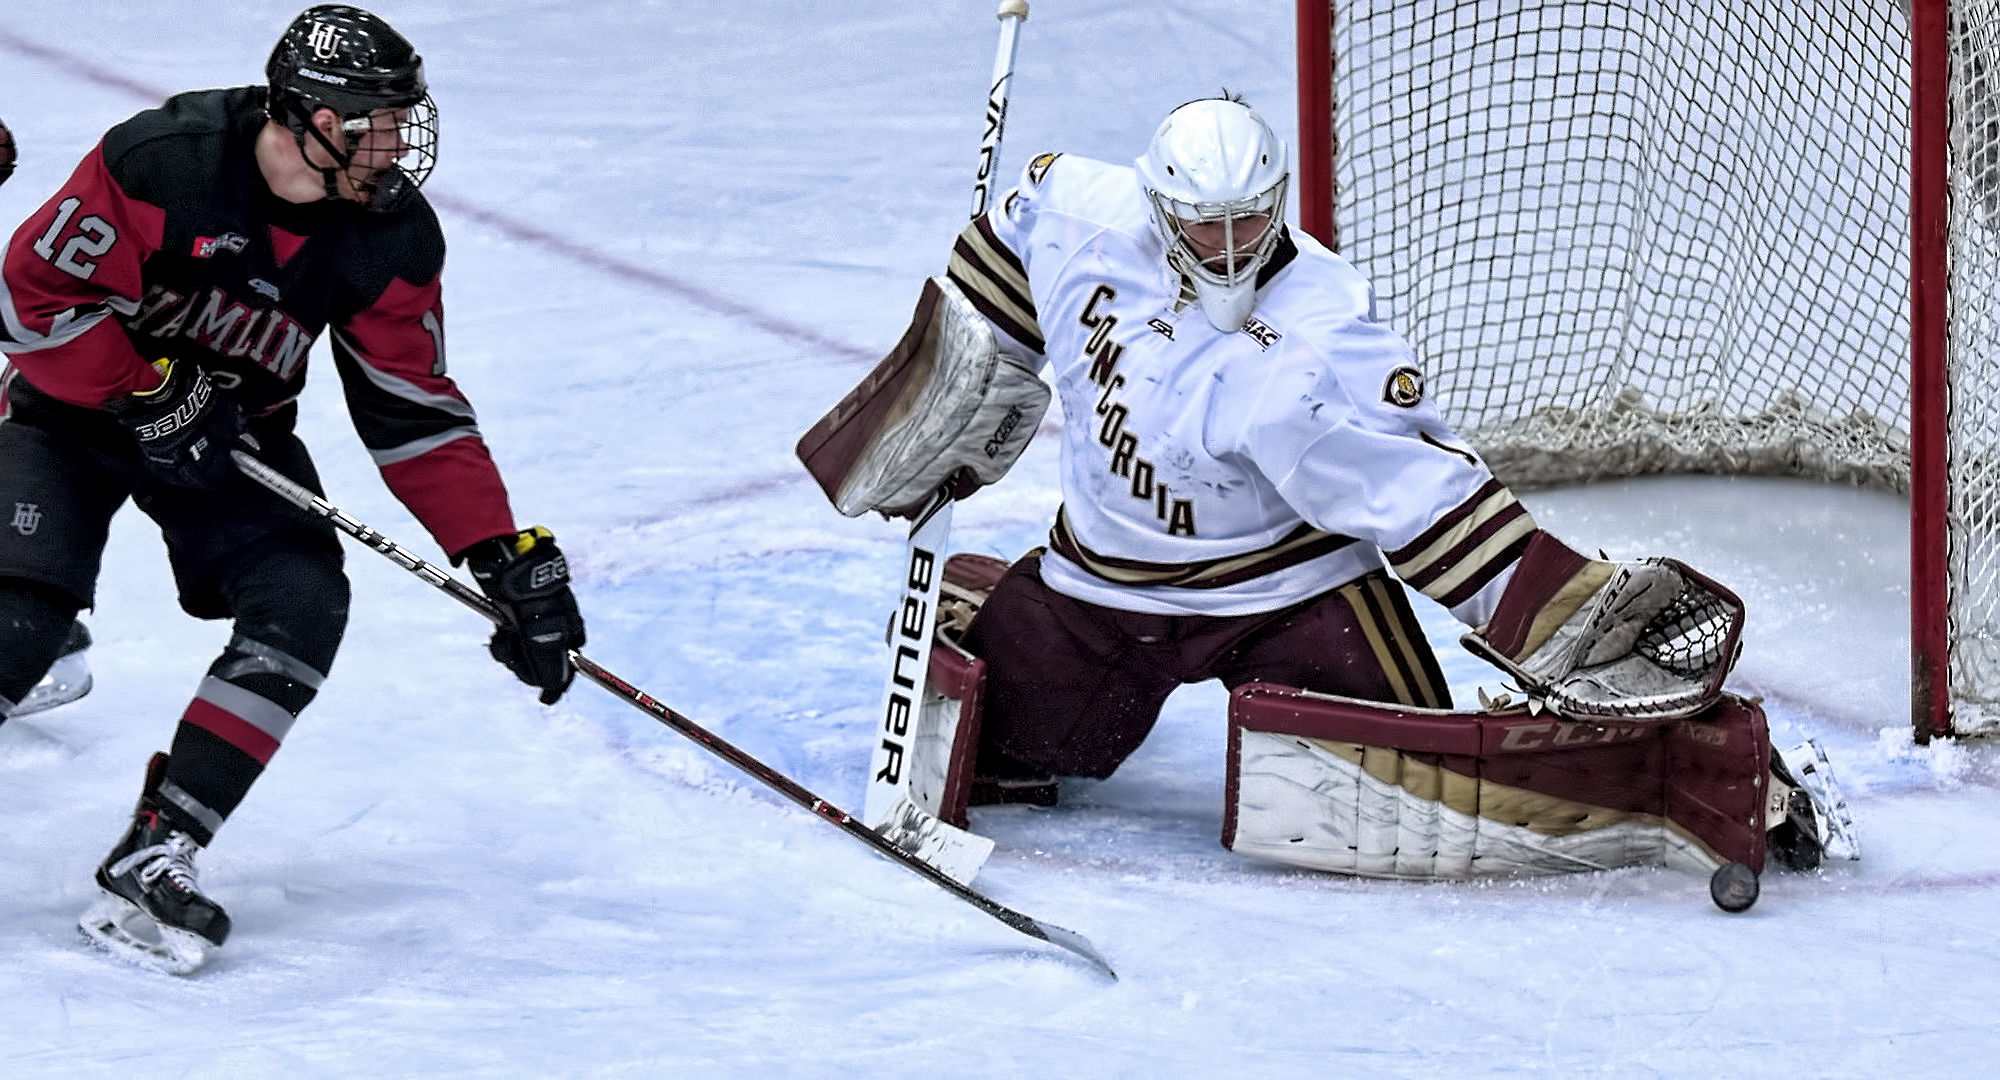 Junior goalie Jacob Stephan makes one of his 34 saves in the Cobbers' 5-1 win over Hamline. Stephan is now fifth in the nation in GAA and fourth in save percentage.